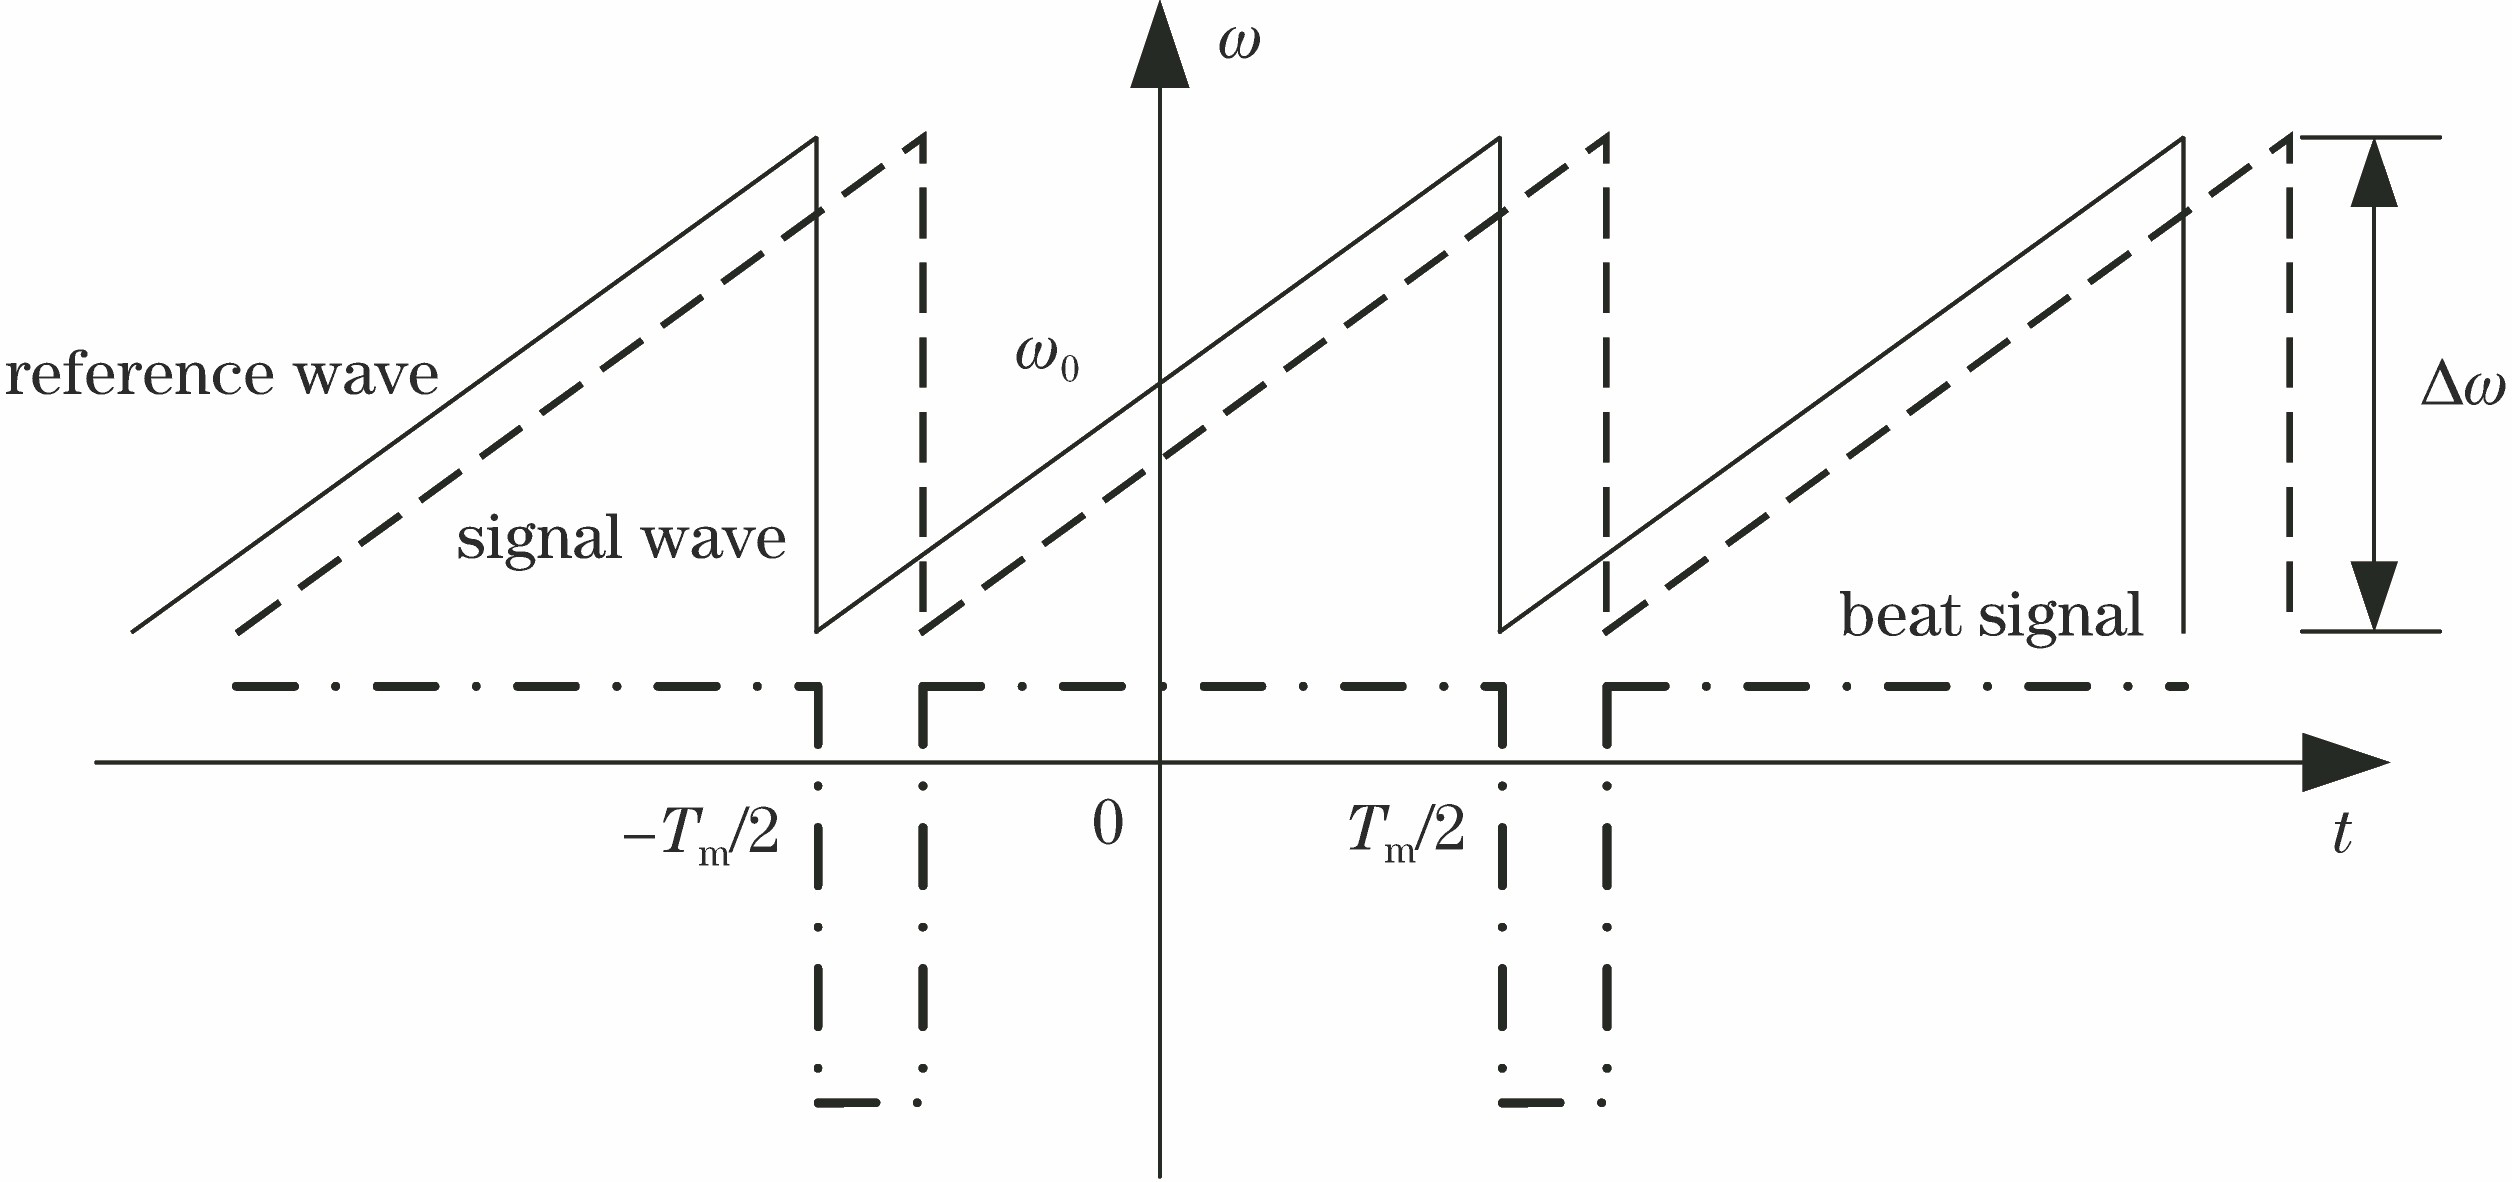 Angular frequency relationship of frequency-modulated continuous wave interference signal under saw-tooth wave modulation